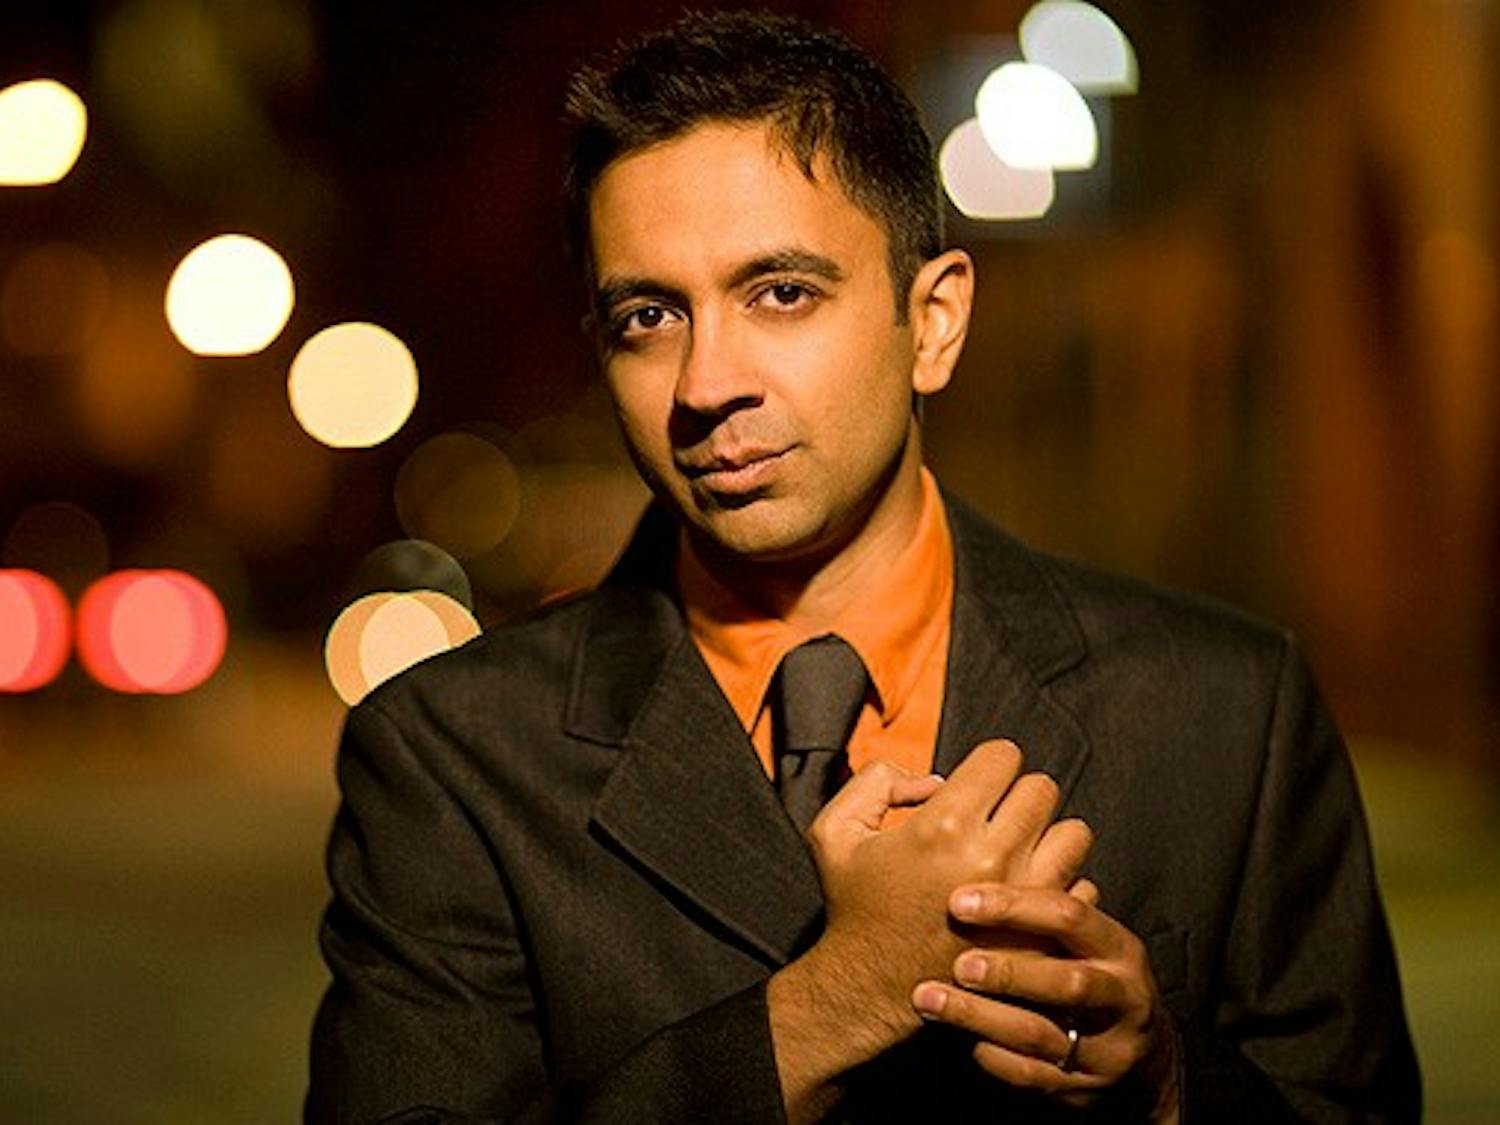 Vijay Iyer, a self-taught jazz pianist and composer, will perform and give a talk as part of Duke Performances’ fall programming. The Vijay Iyer Trio’s most recent album, Historicity, topped the year-end lists of publications like The New York Times and The Los Angeles Times.